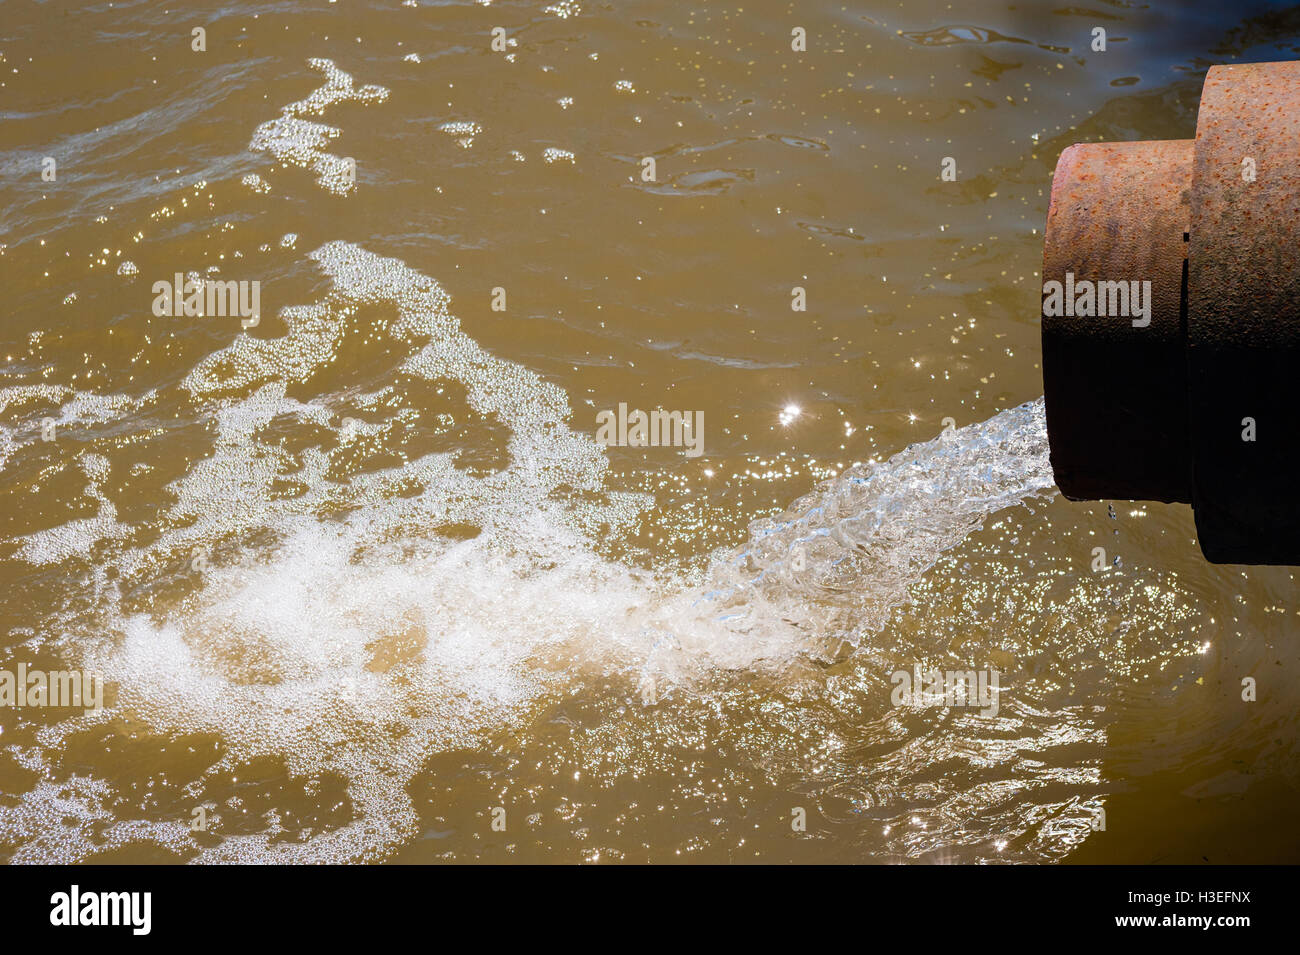 Water flowing from rusted metal culvert drain pipe opening and splashing into foamy brown water. Stock Photo